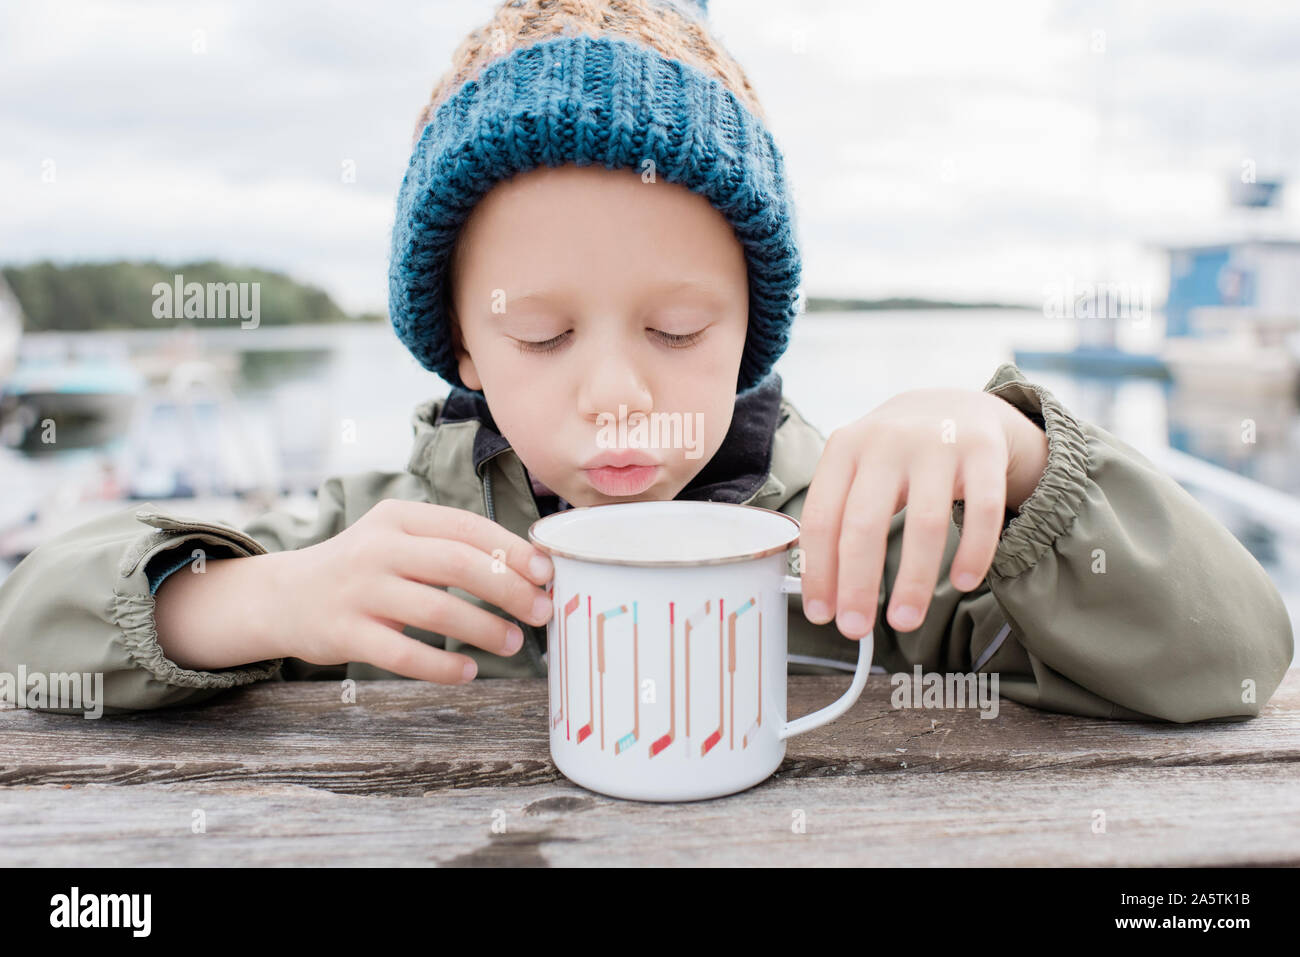 young boy drinking hot chocolate outside on a picnic bench in winter Stock Photo